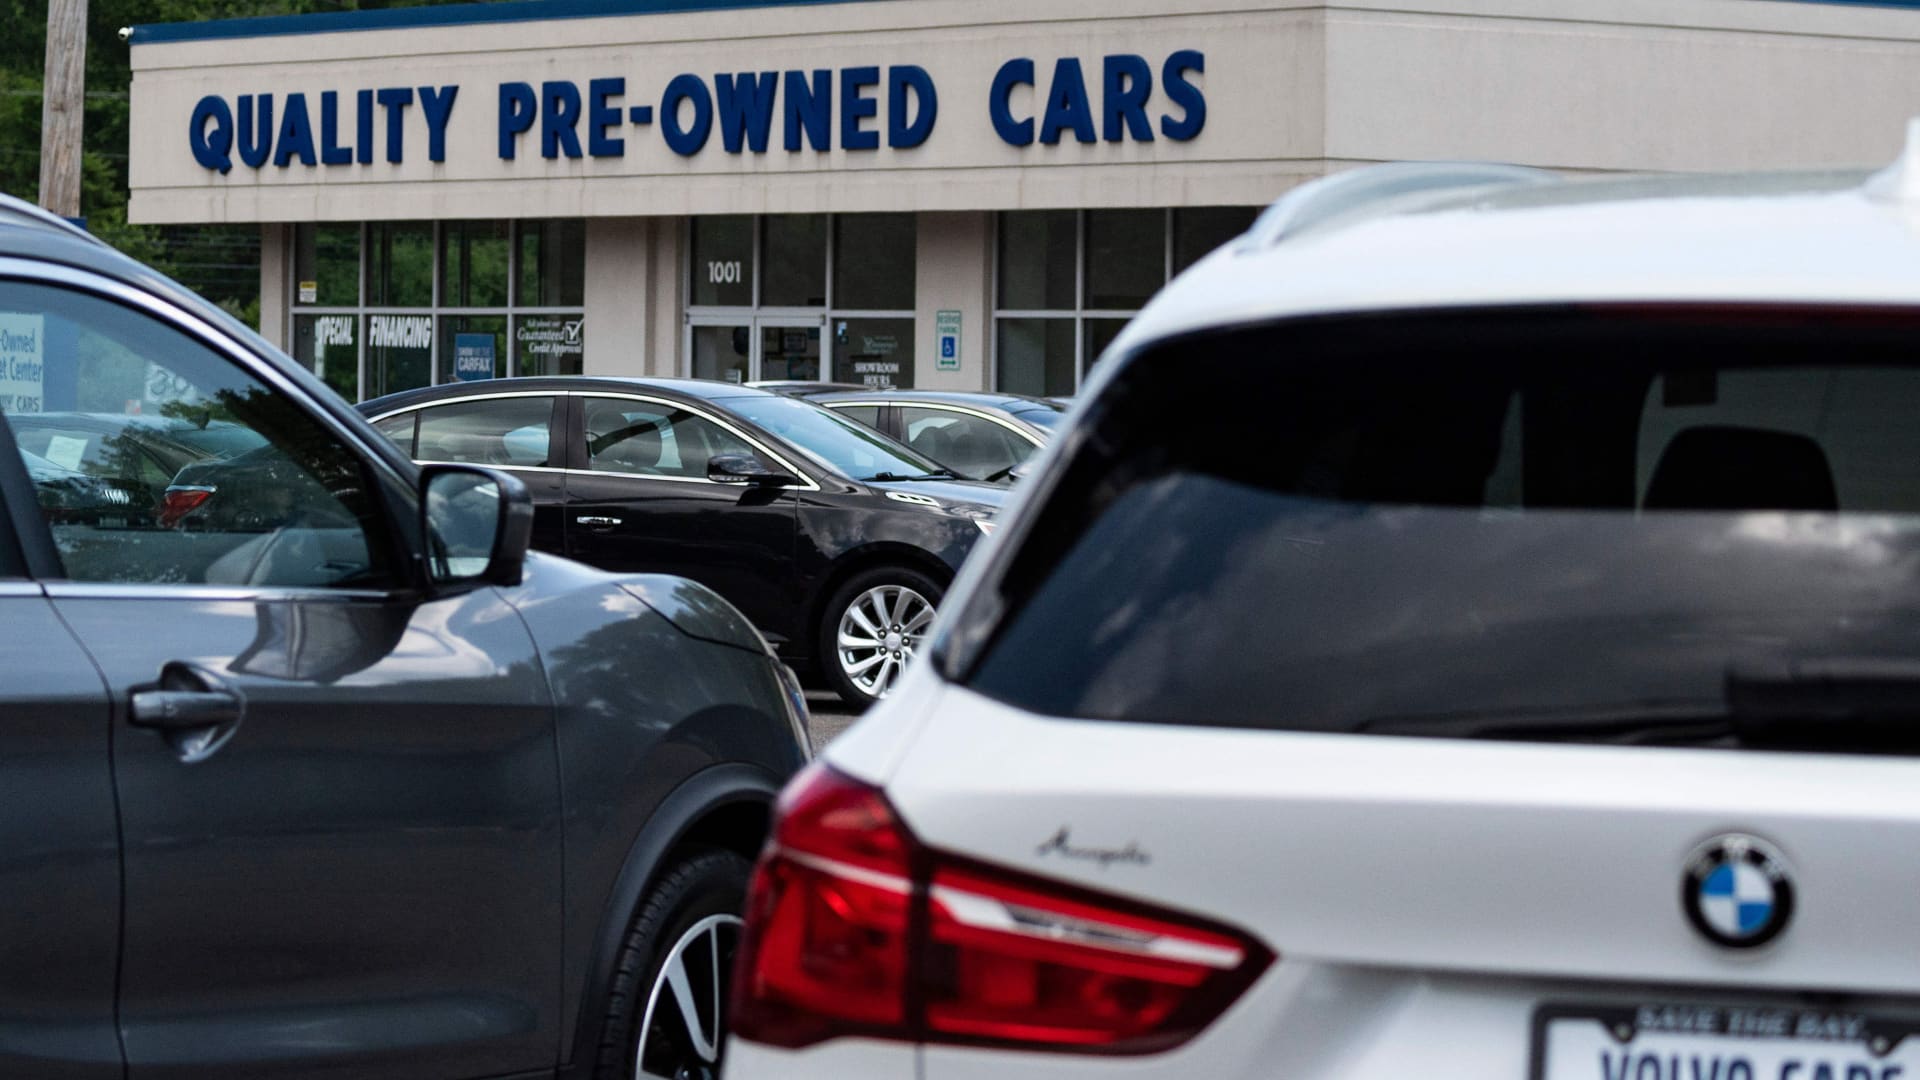 A used car dealership is seen in Annapolis, Maryland on May 27, 2021, as many car dealerships across the country are running low on new vehicles as a computer chip shortage has caused production at many vehicle manufactures to nearly stop.